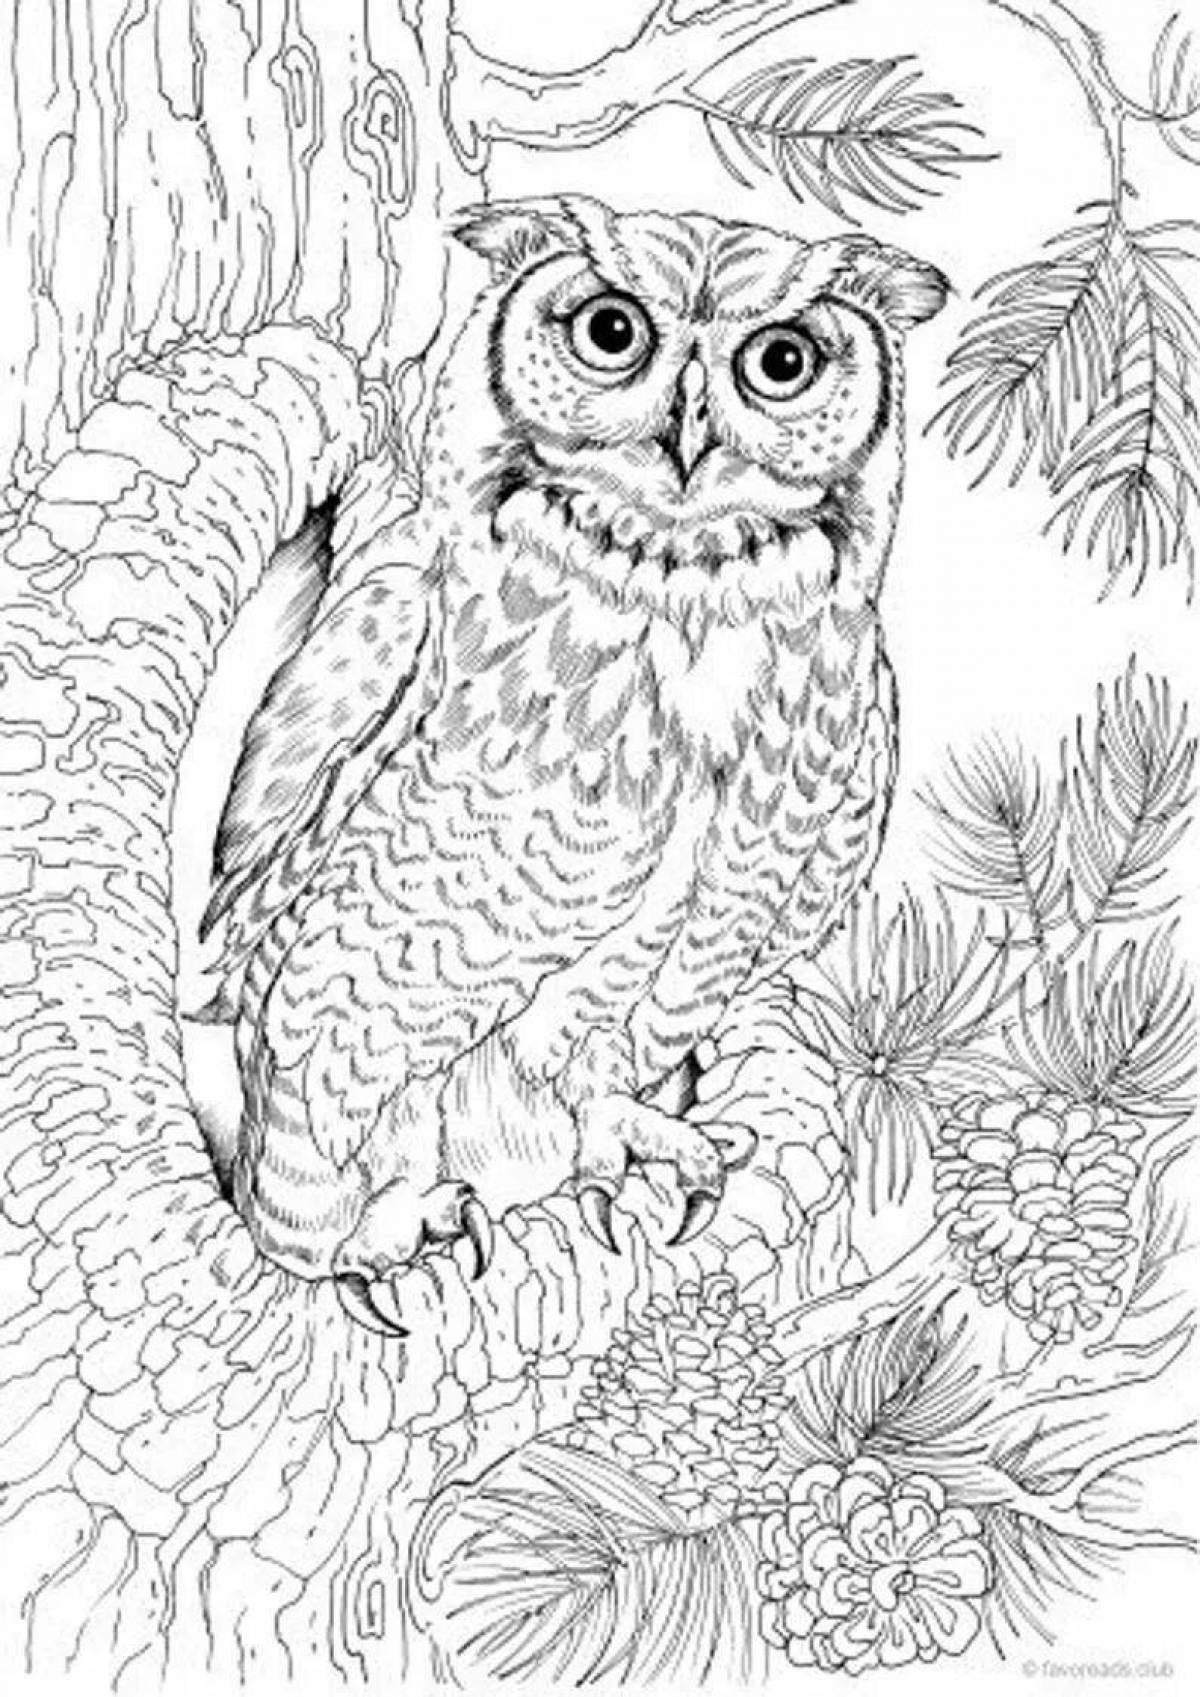 Exquisite long-eared owl coloring book